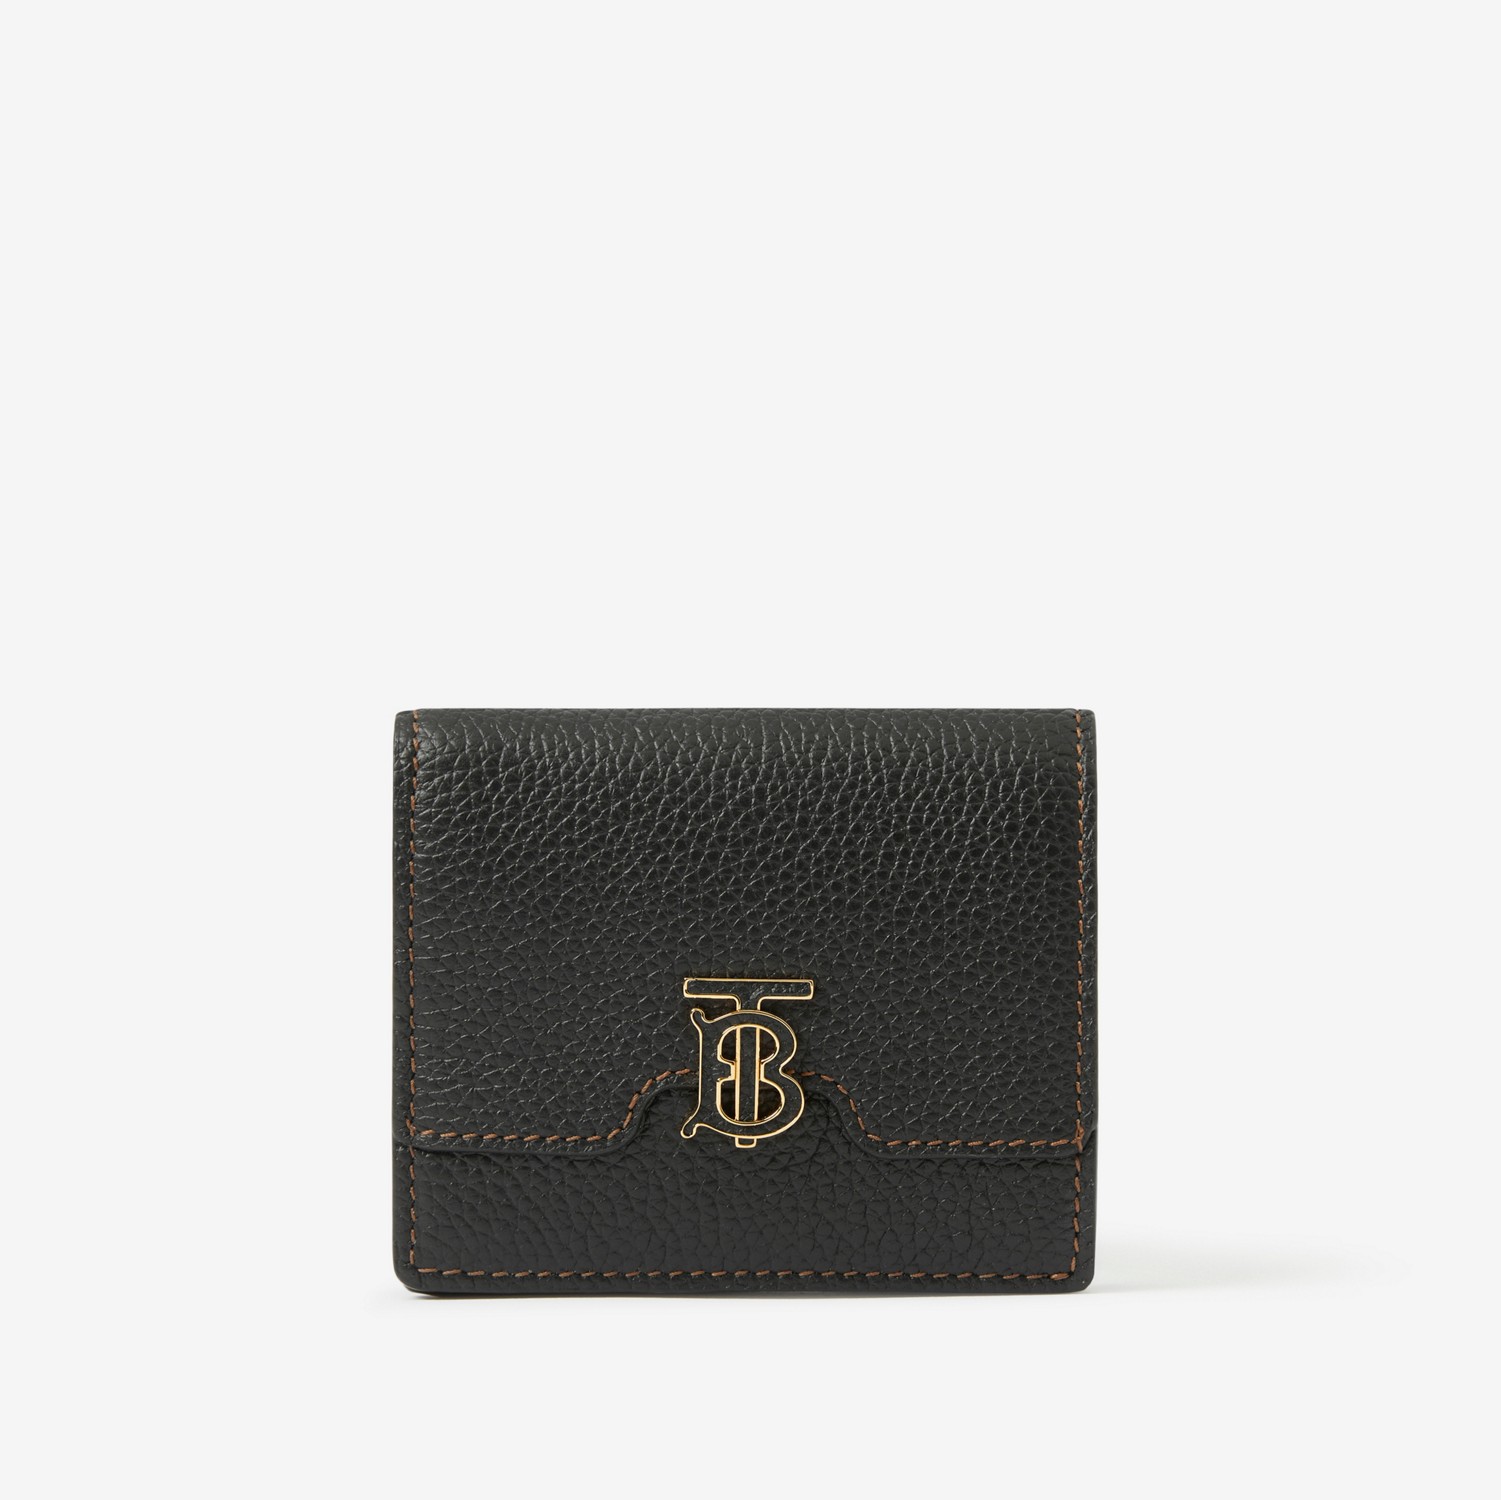 Grainy Leather TB Folding Wallet in Black - Women | Burberry® Official